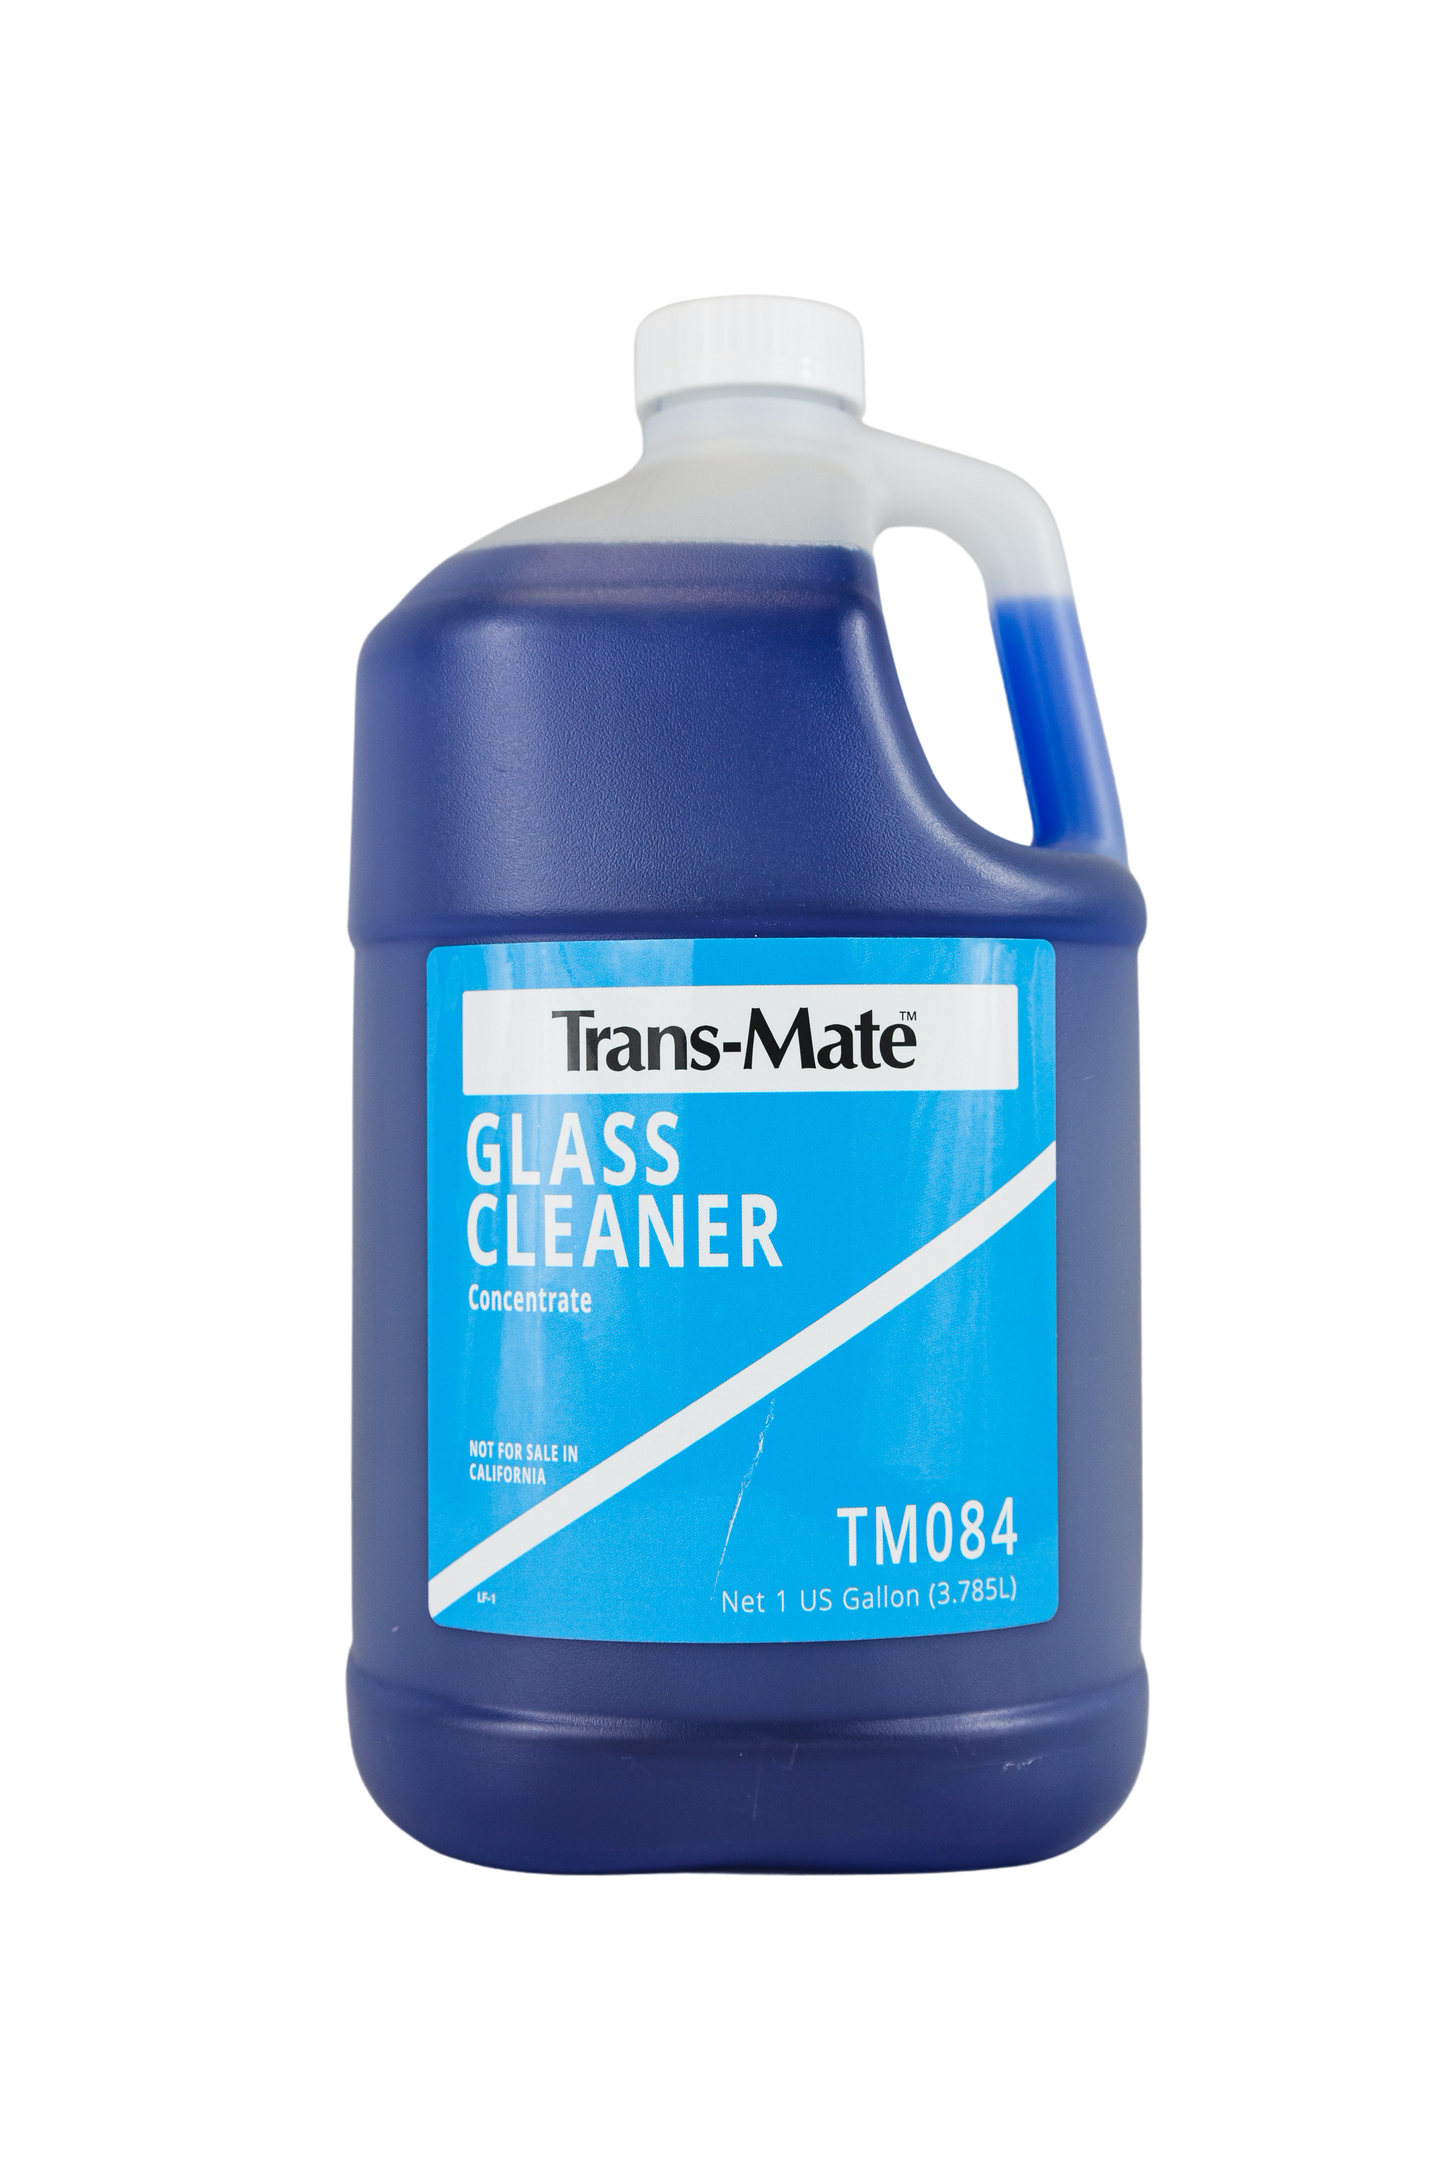 Trans-Mate Glass Cleaner Concentrate